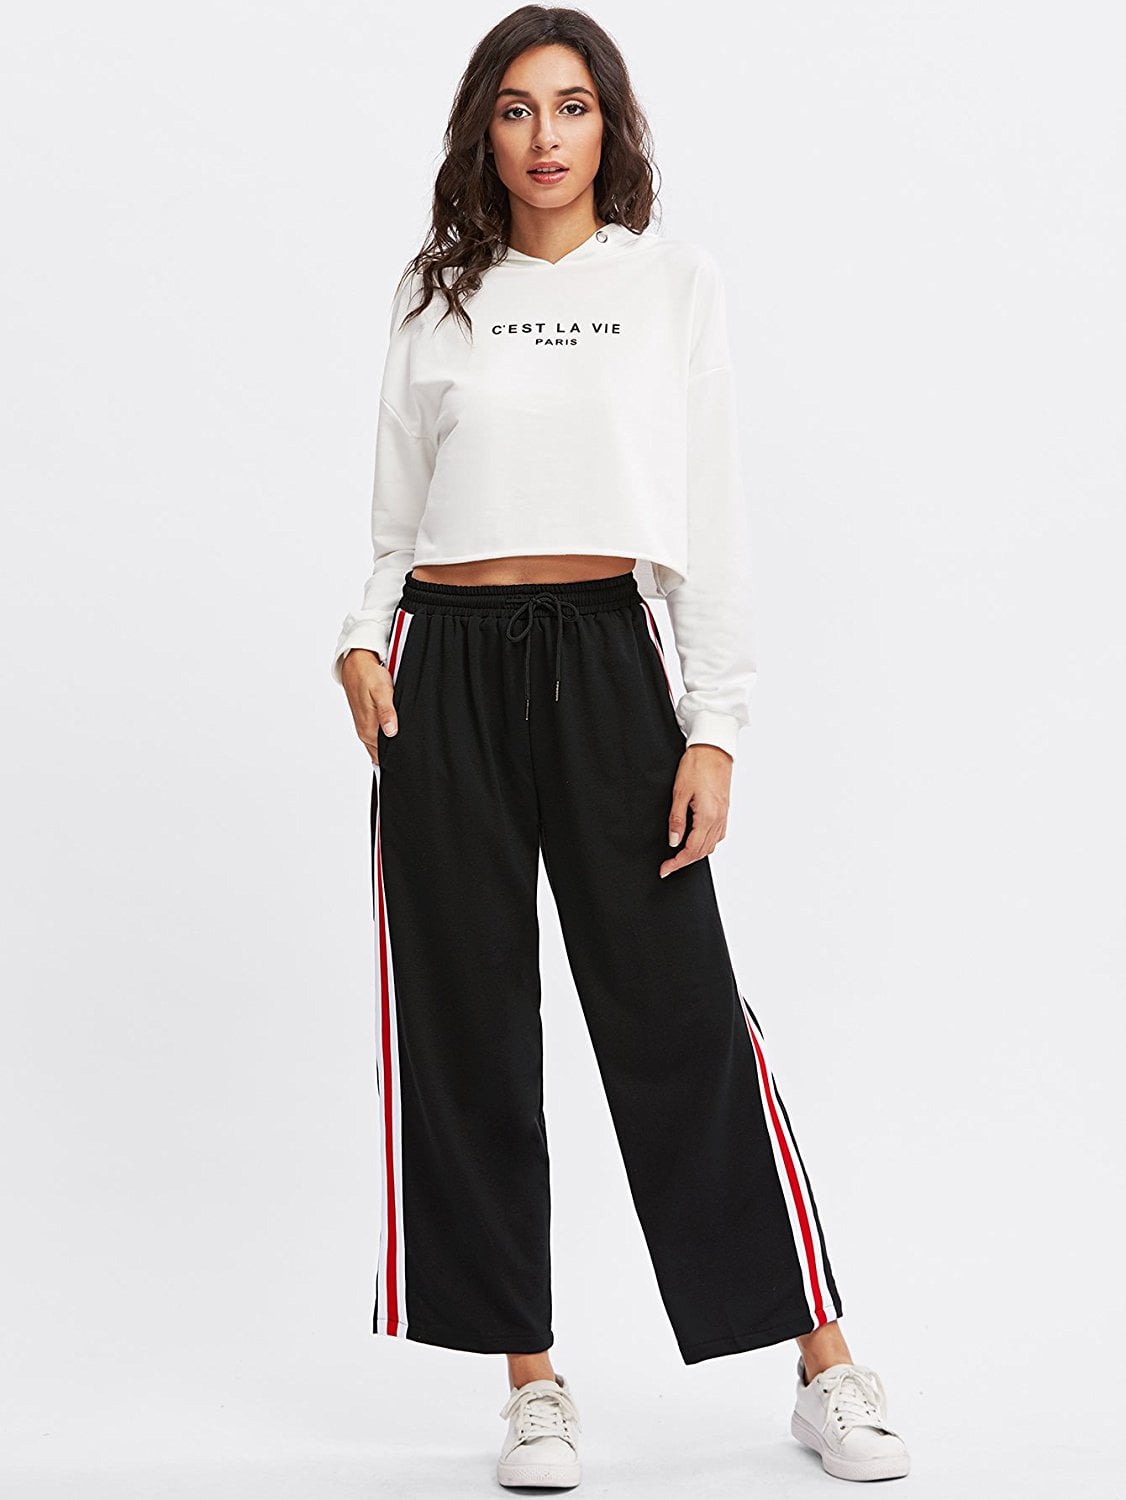 SweatyRocks Side Striped High Waist Pants, Kick Your Jeans to the Curb —  These 11 Track Pants Are All Under $30 on